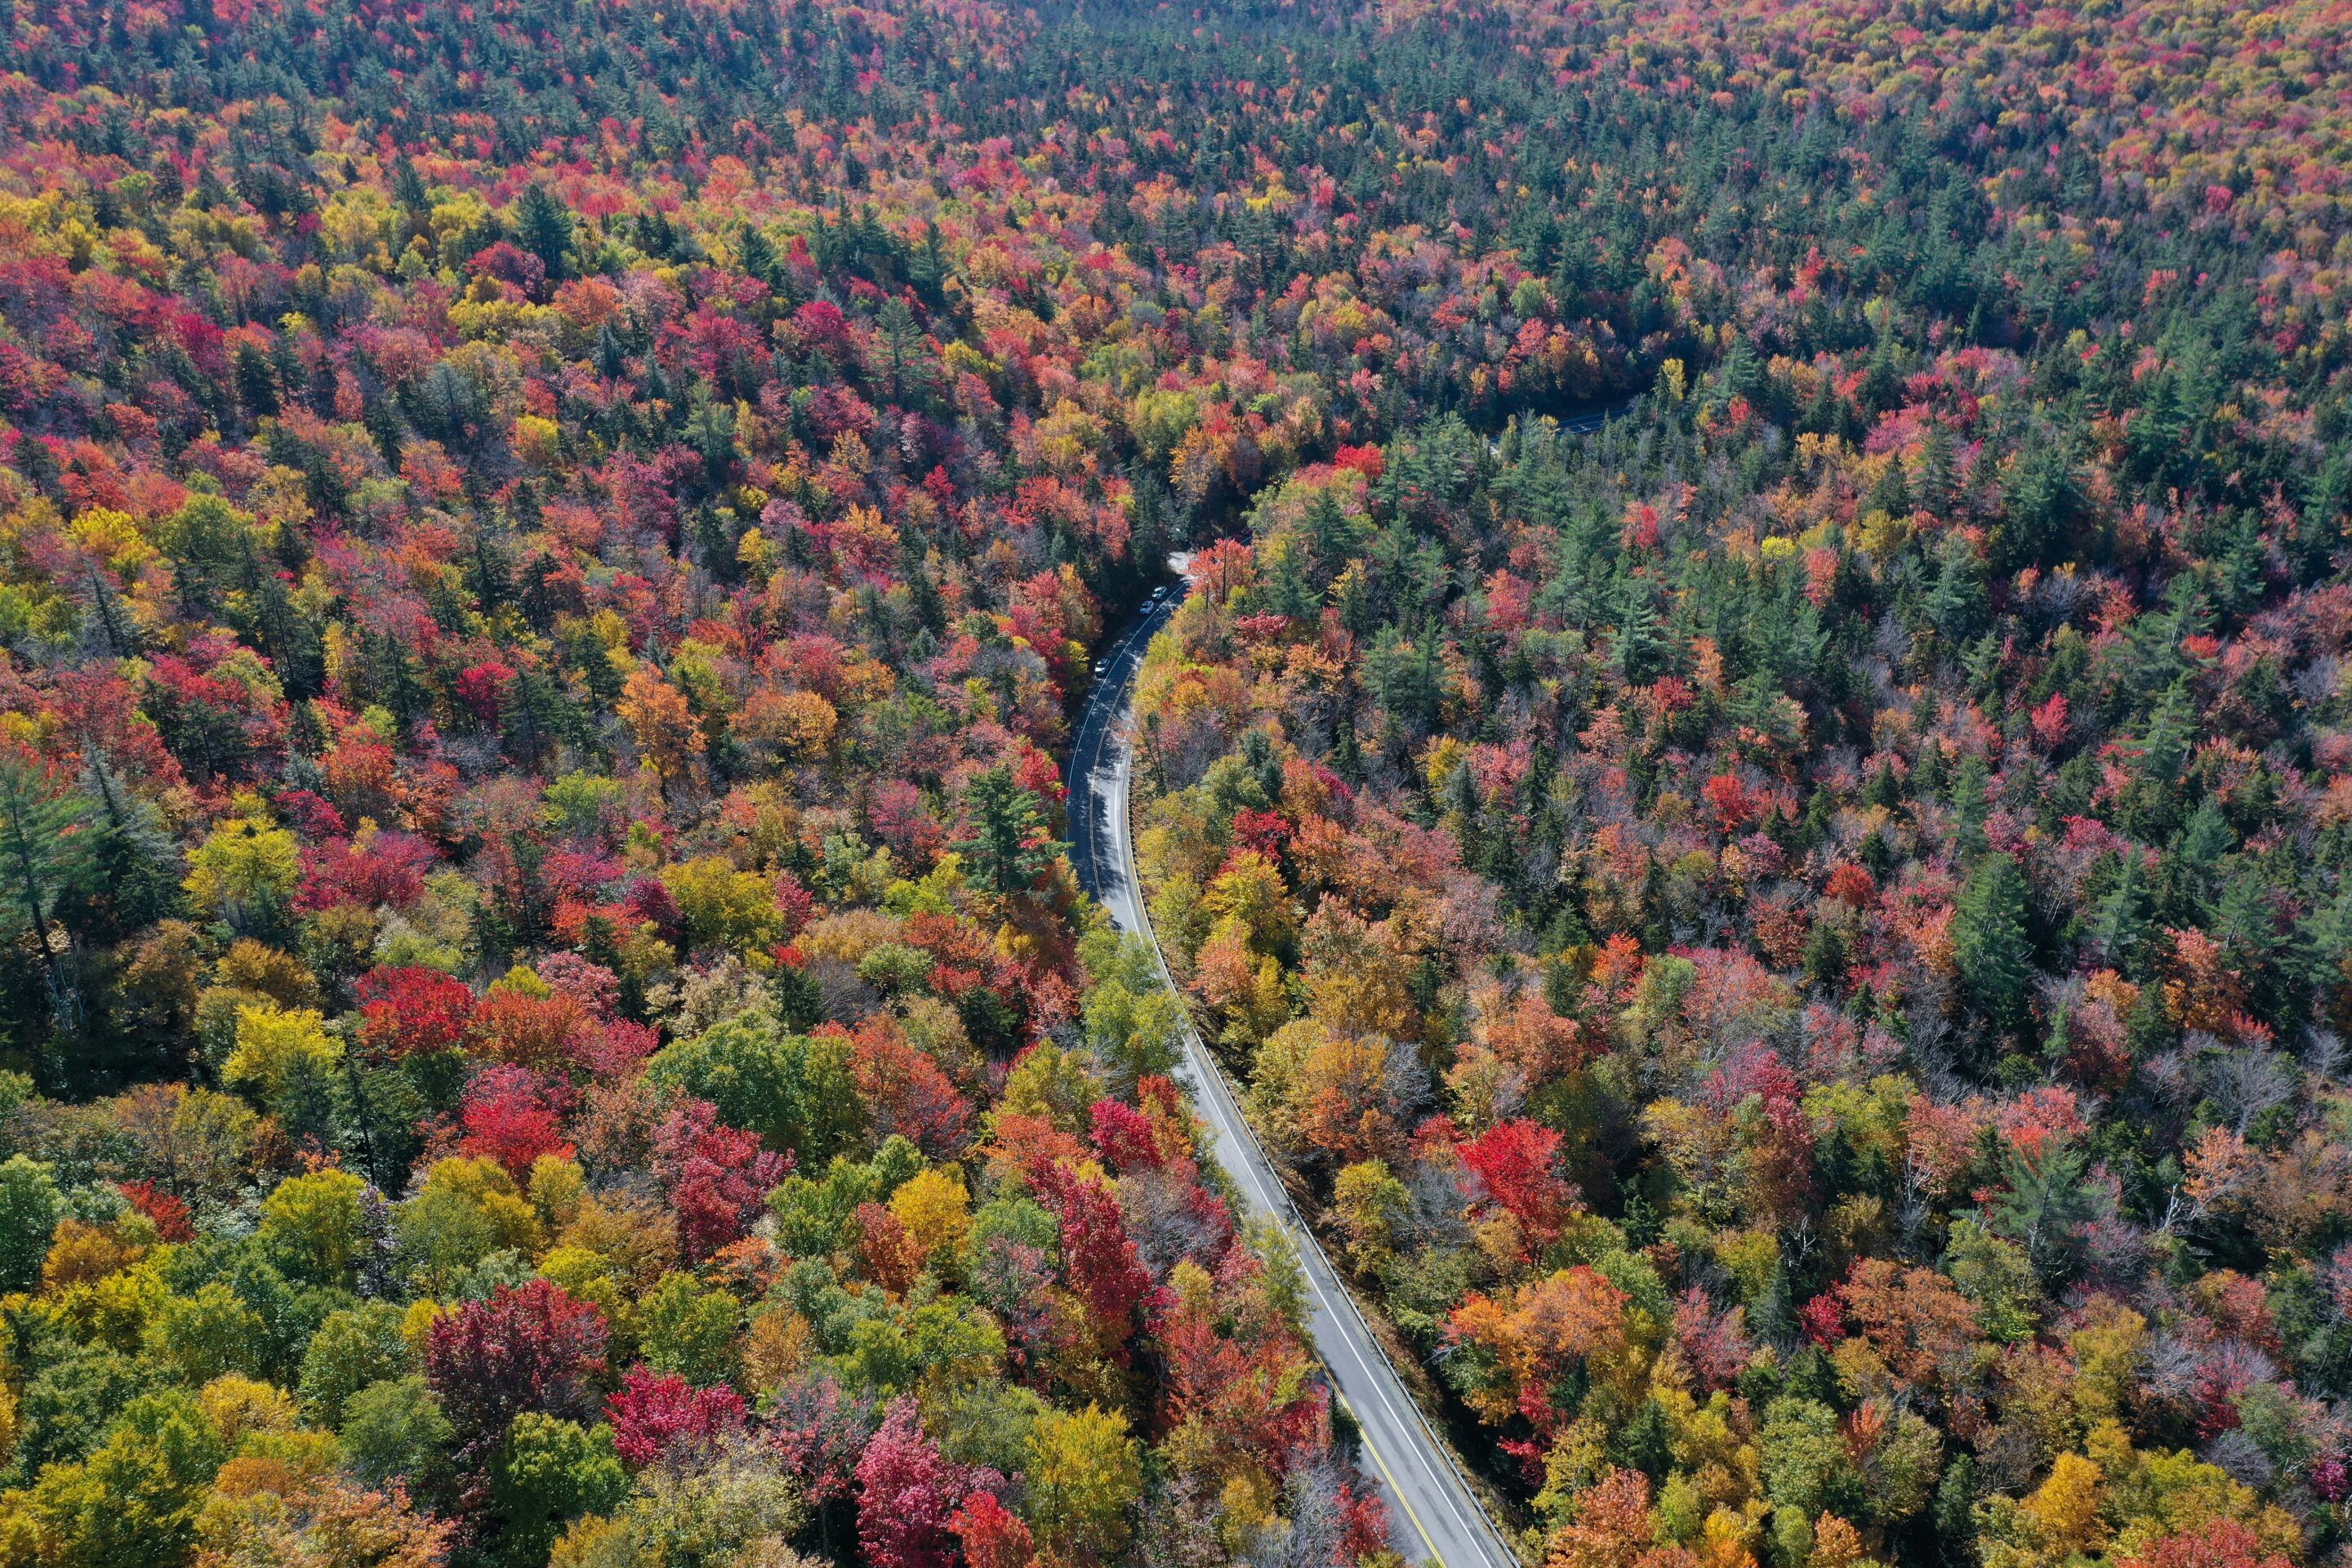 #Future hurricanes could compromise New England forests’ ability to store and sequester carbon